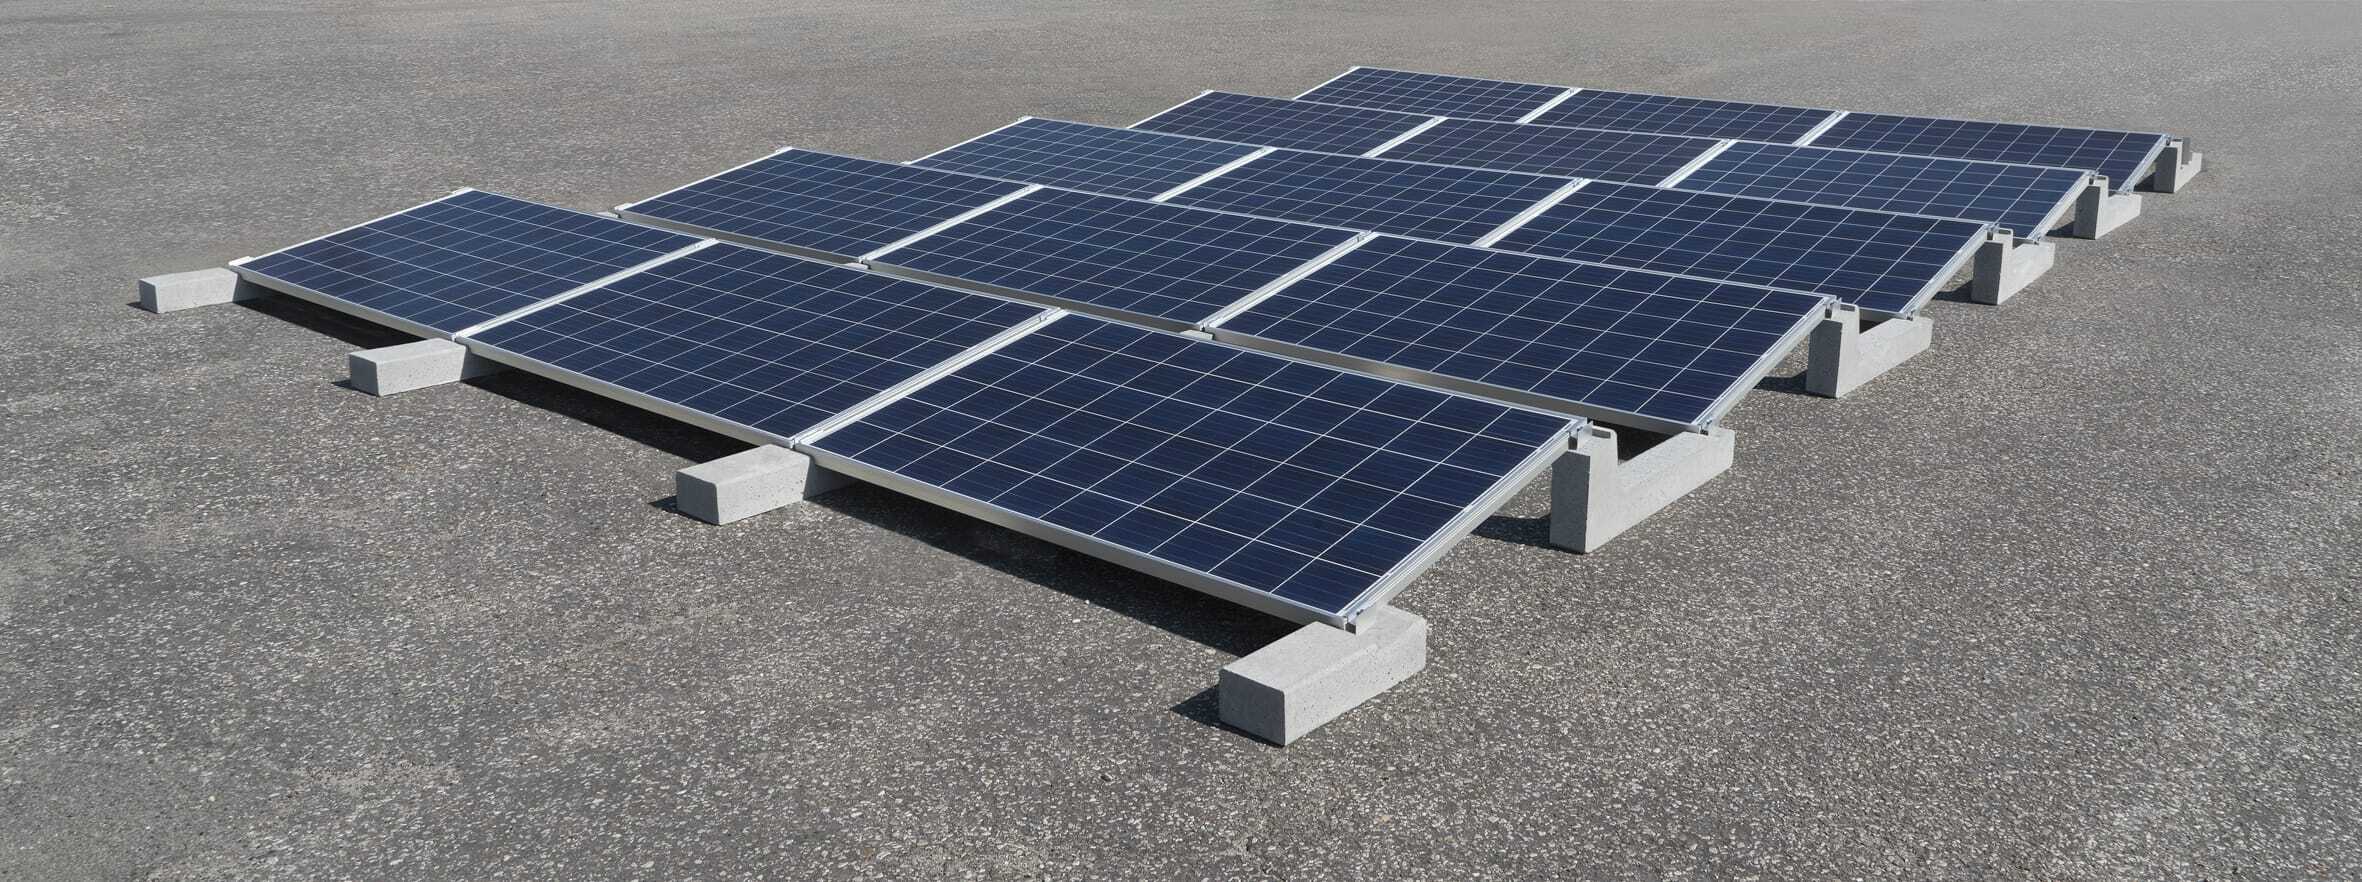 BALLAST FOR PHOTOVOLTAIC SYSTEMS